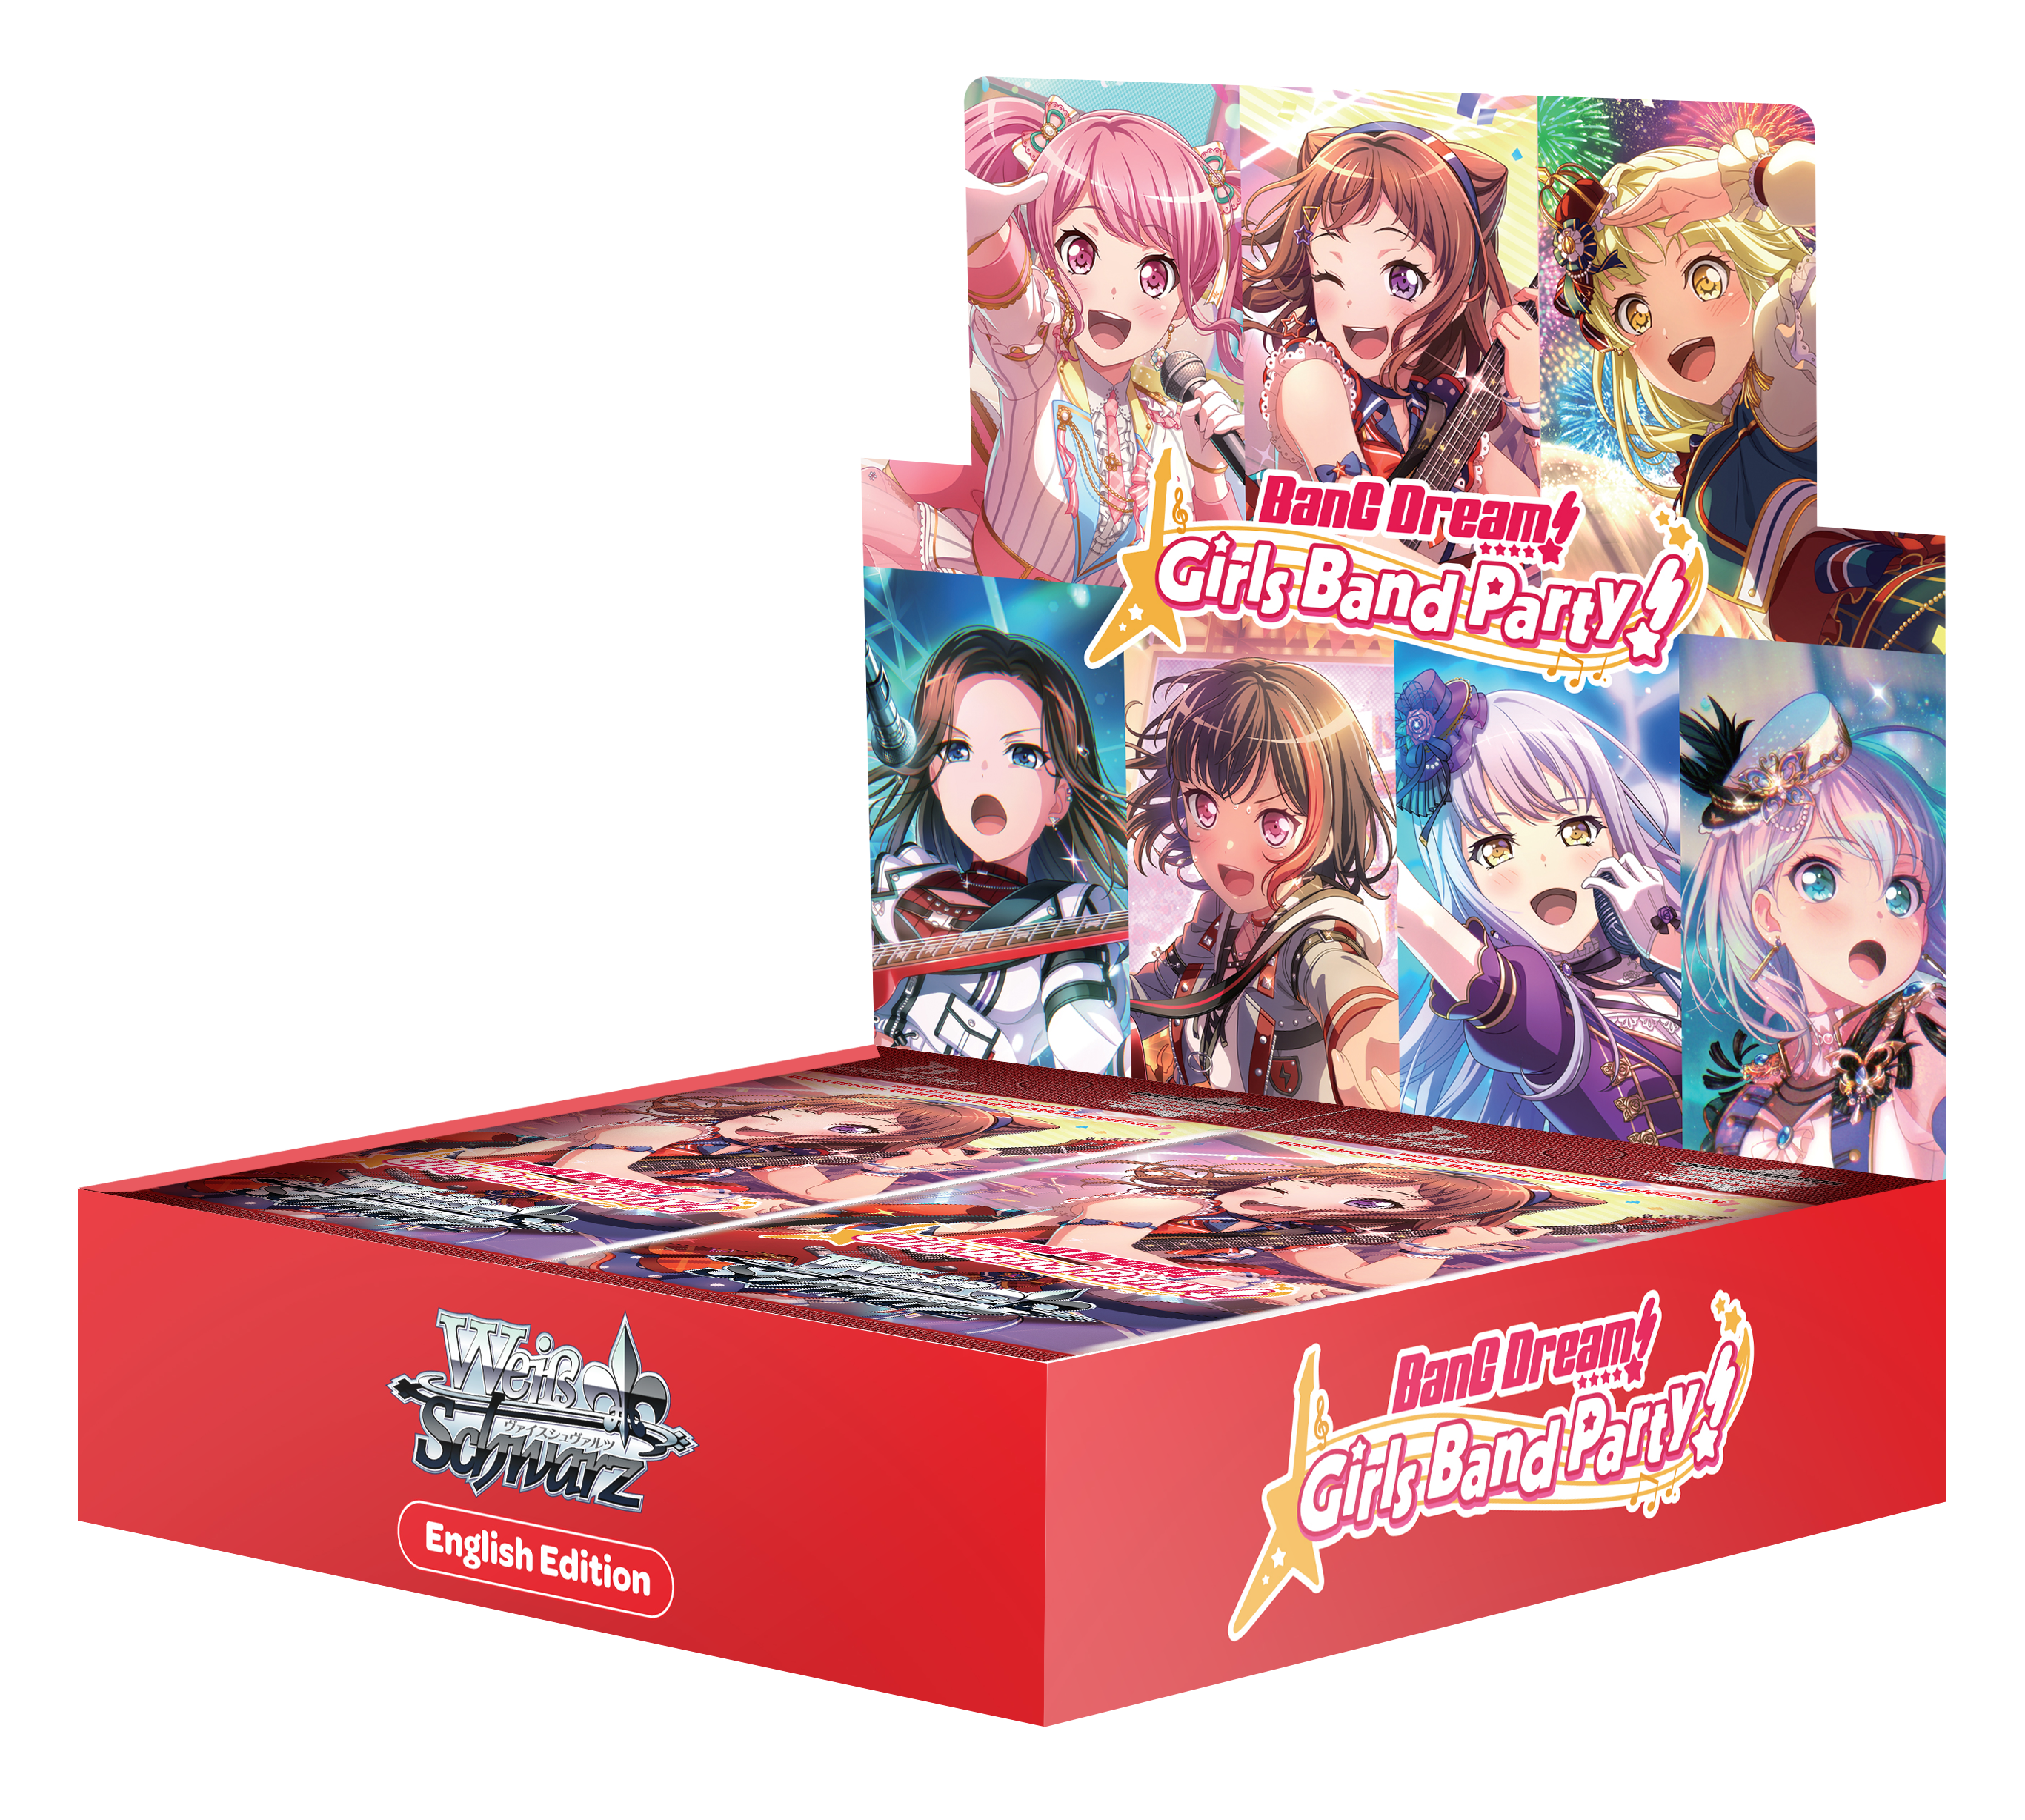 Booster Pack BanG Dream! Girls Band Party! 5th Anniversary ｜ Weiß Schwarz